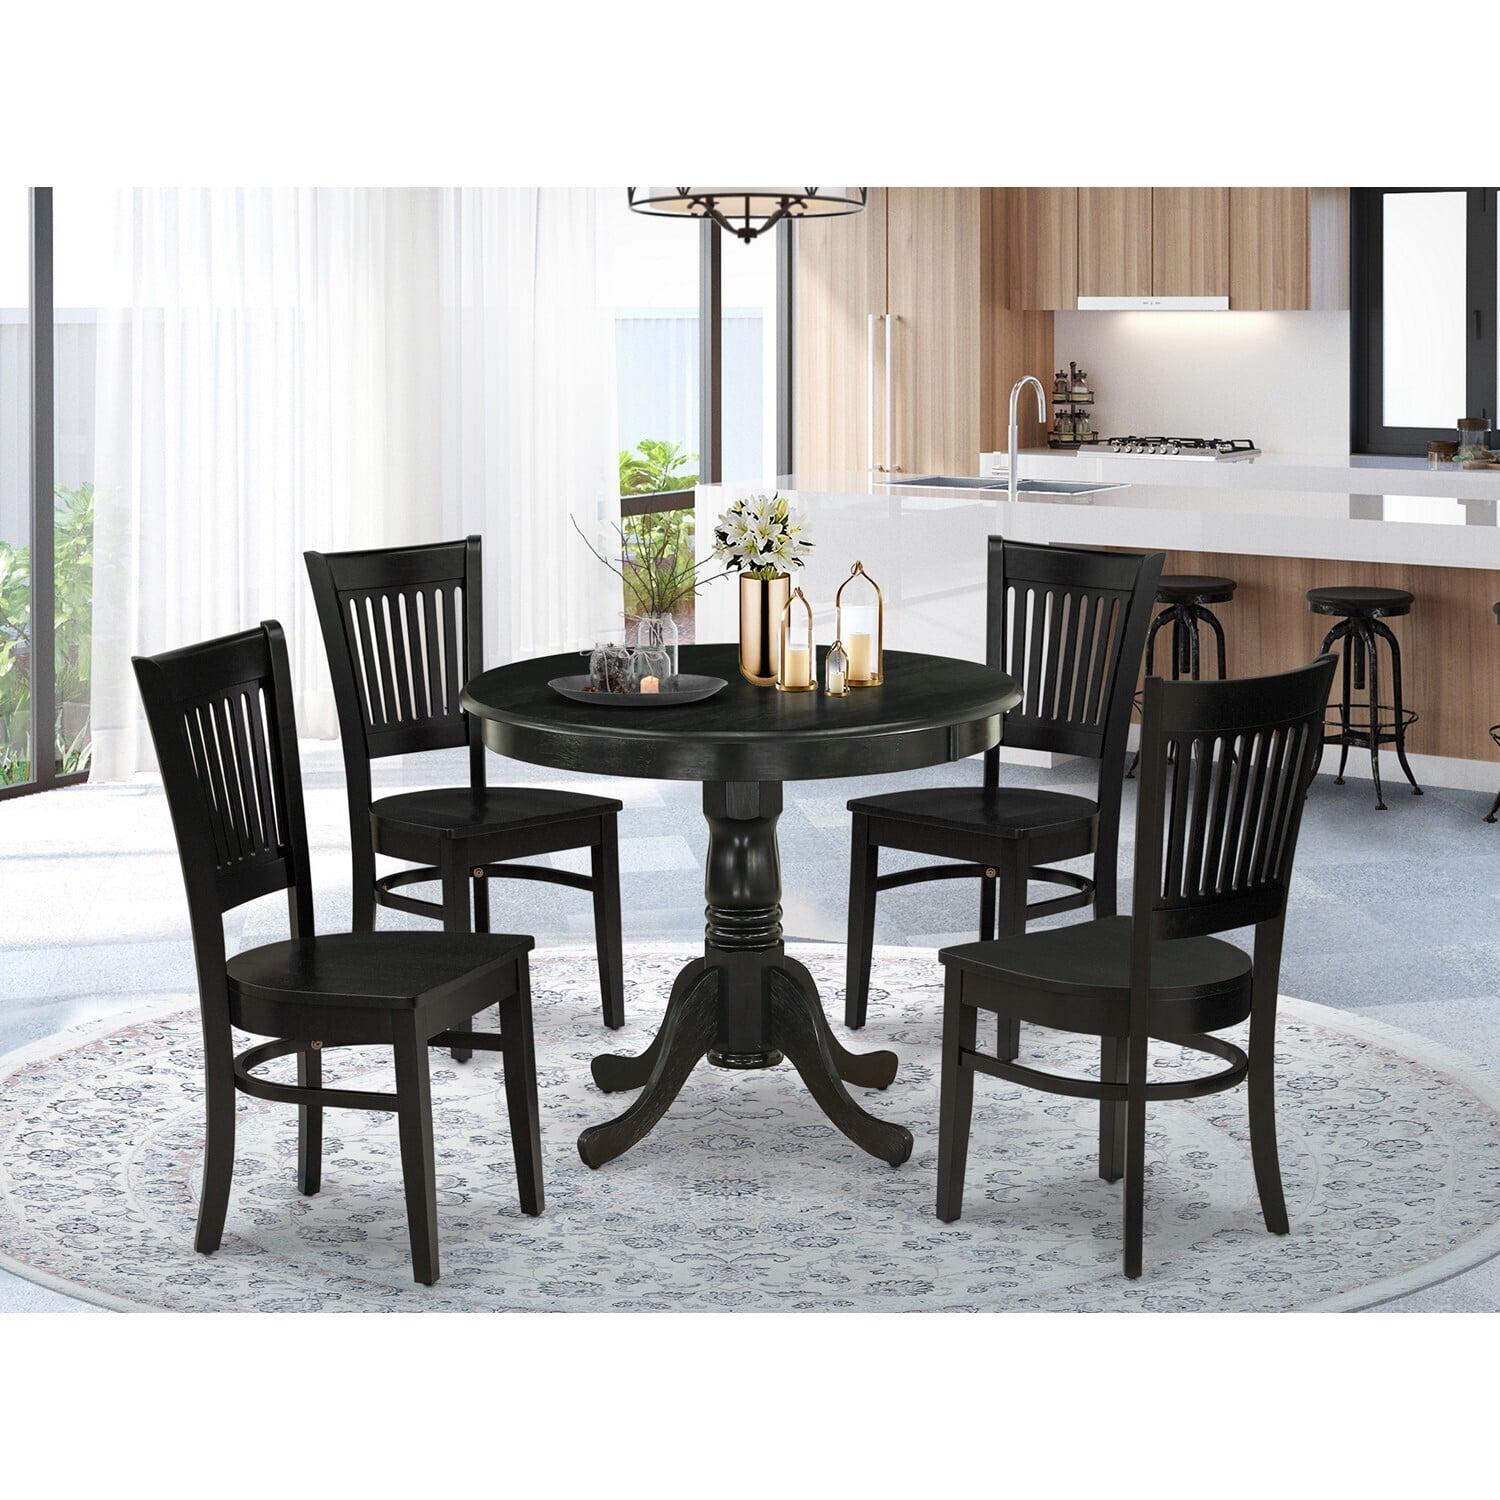 Elegant Black 5-Piece Round Dining Set with Slatted Wooden Chairs